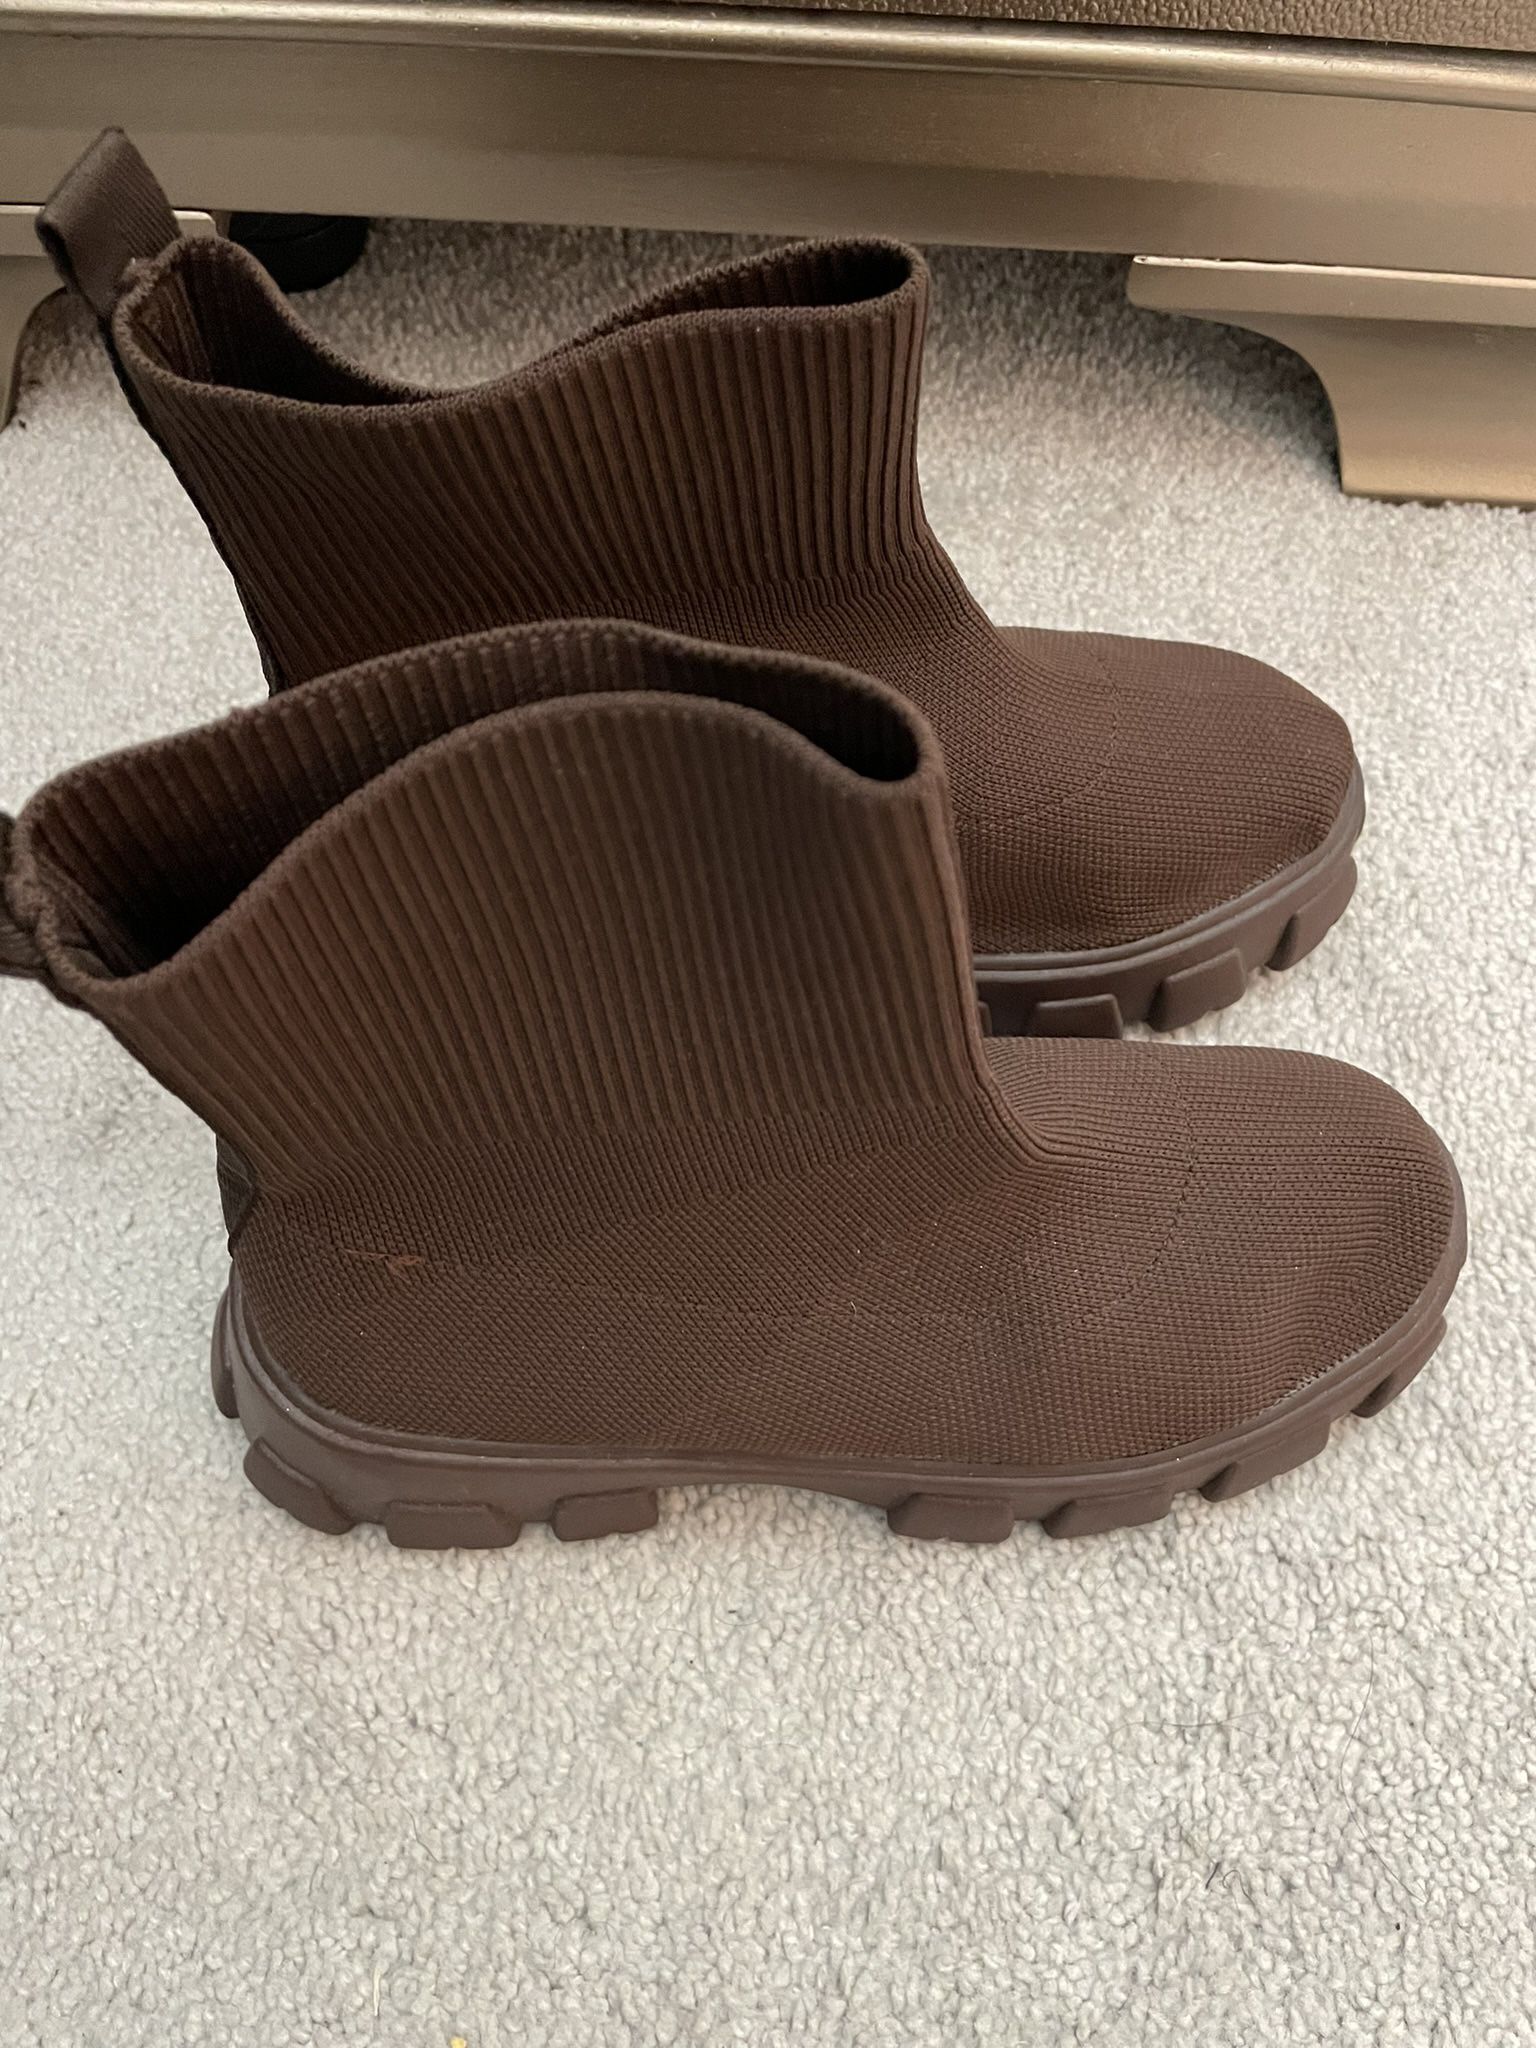 Women’s Brown Casual Boots (Sz. 8)